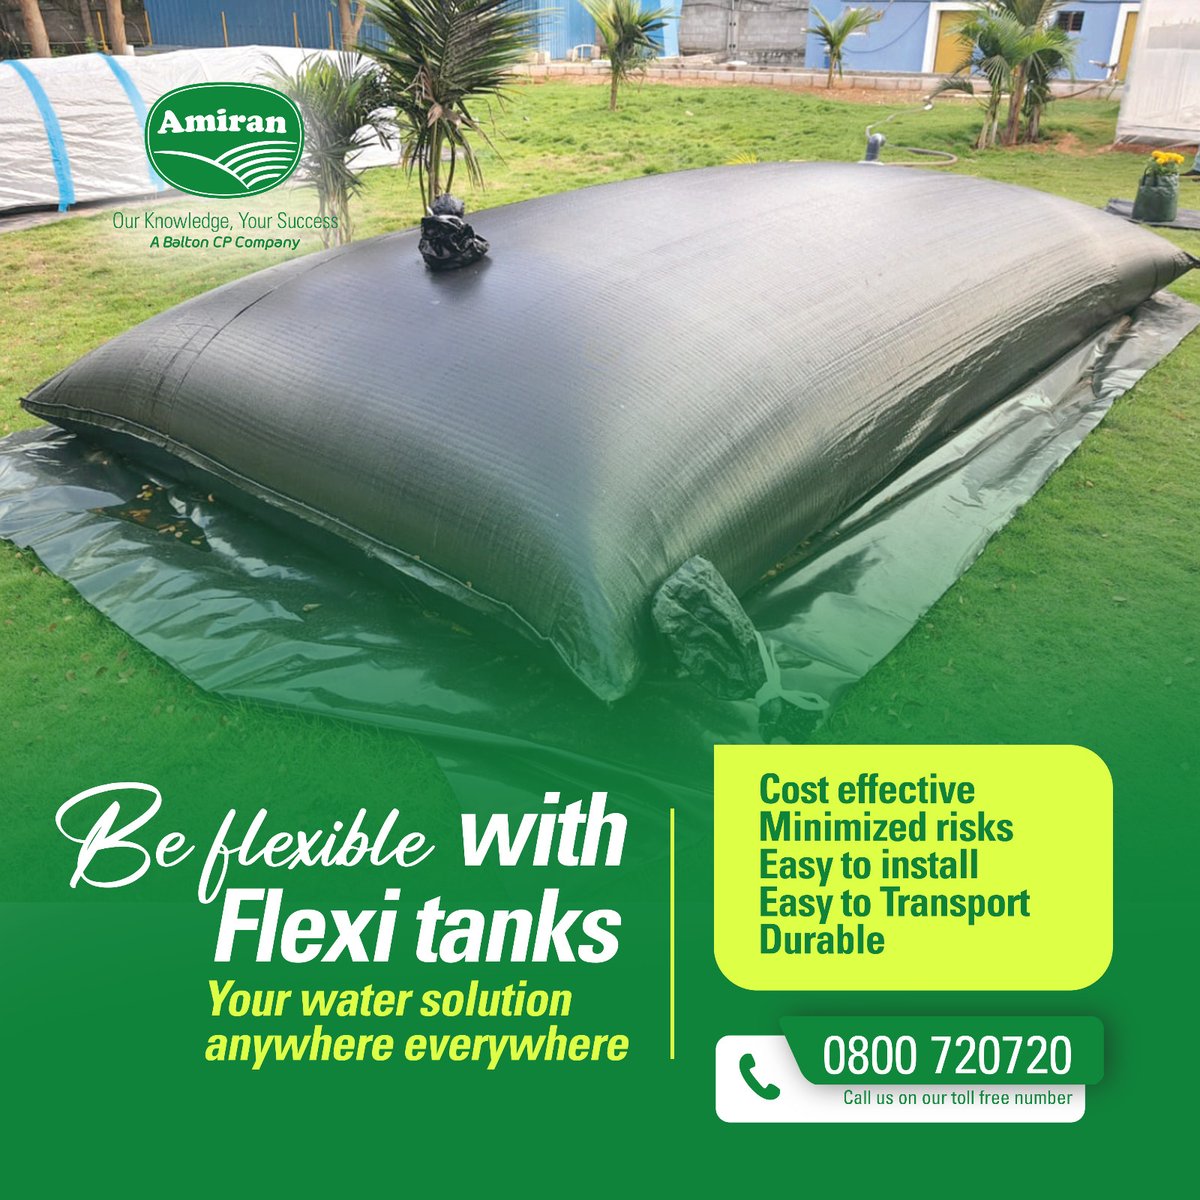 The Amiran Flexi Tanks are now available at discounted prices! Crafted with multiple layers of polyethylene and wrapped in durable woven fabric, they're designed to withstand the toughest conditions. Don't miss out on our discounted prices! Offer valid until the end of March.